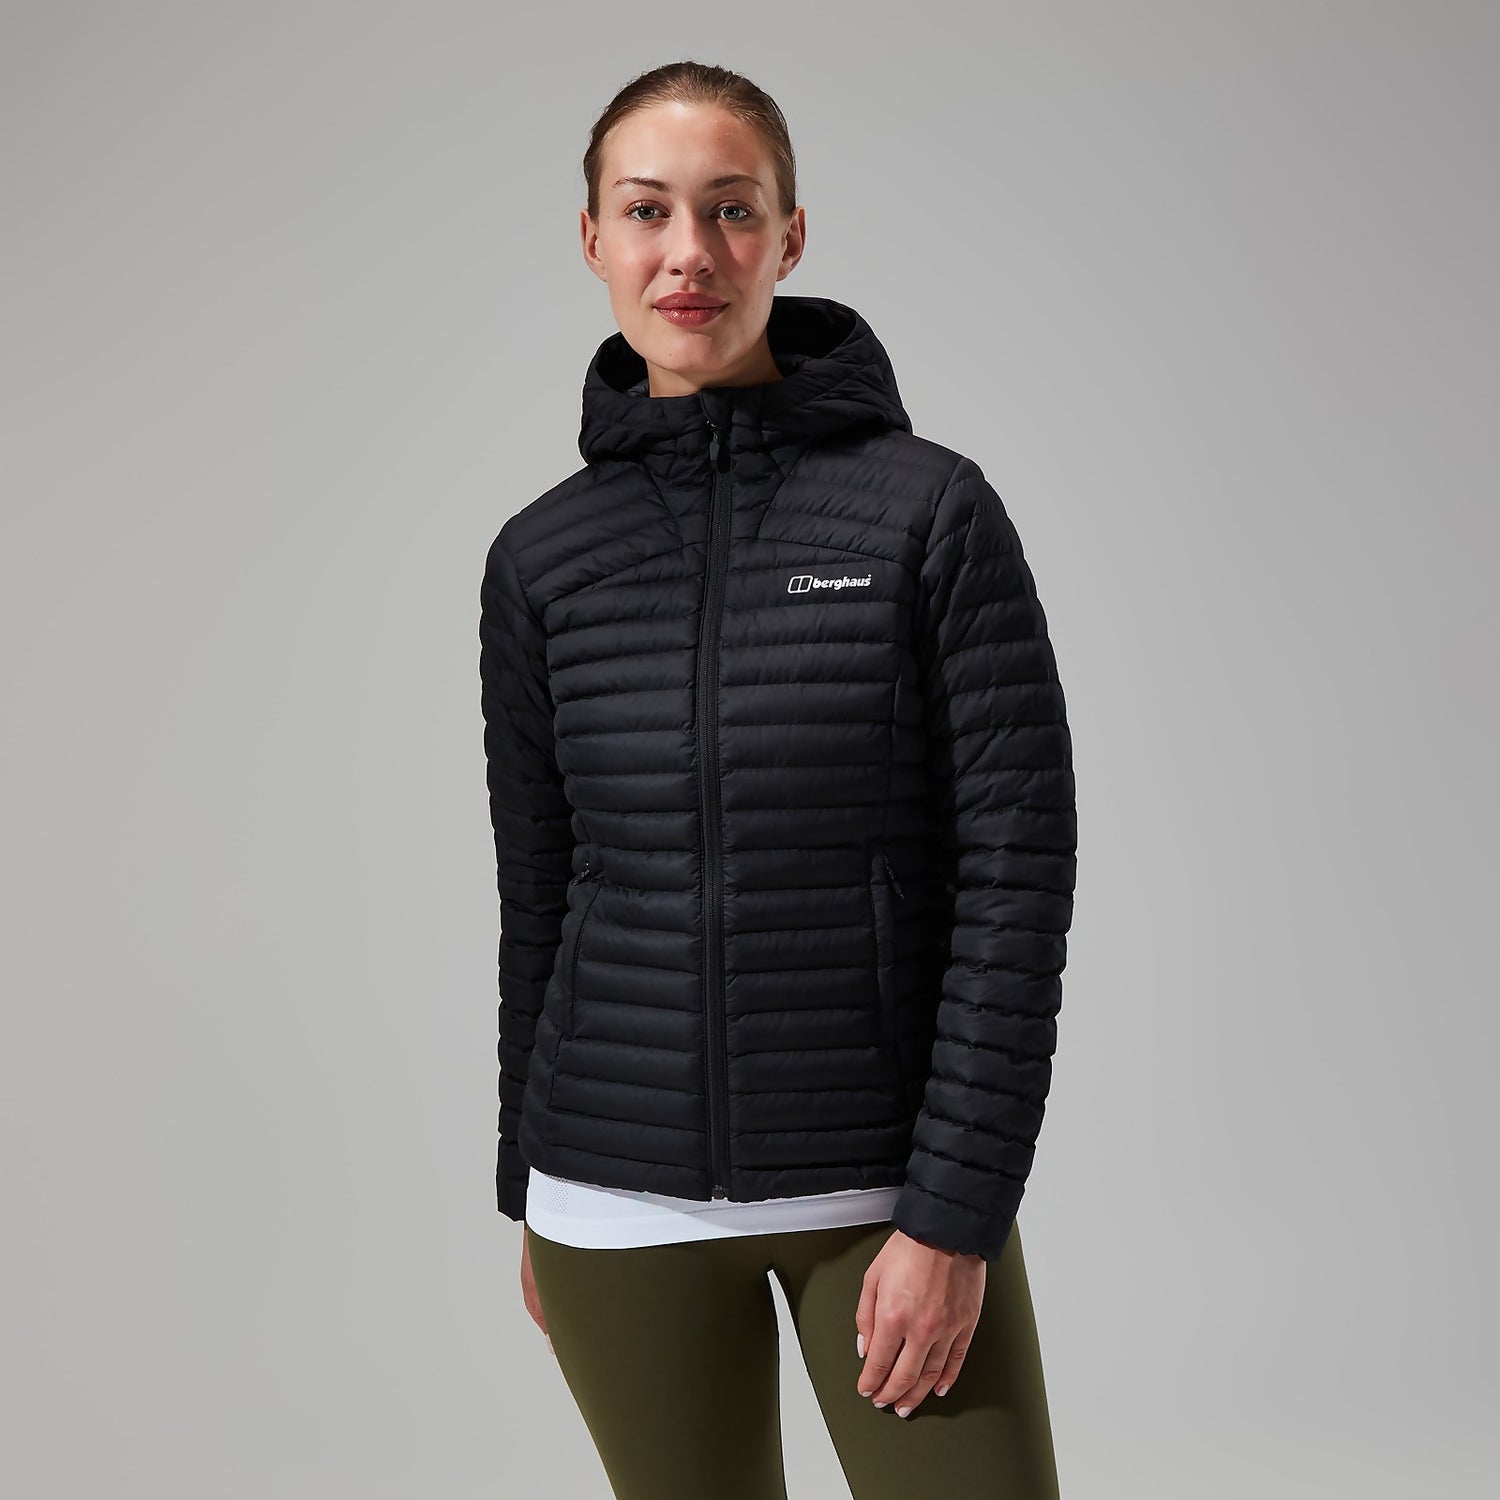 Unlock Wilderness' choice in the Berghaus Vs North Face comparison, the Nula Micro Jacket by Berghaus